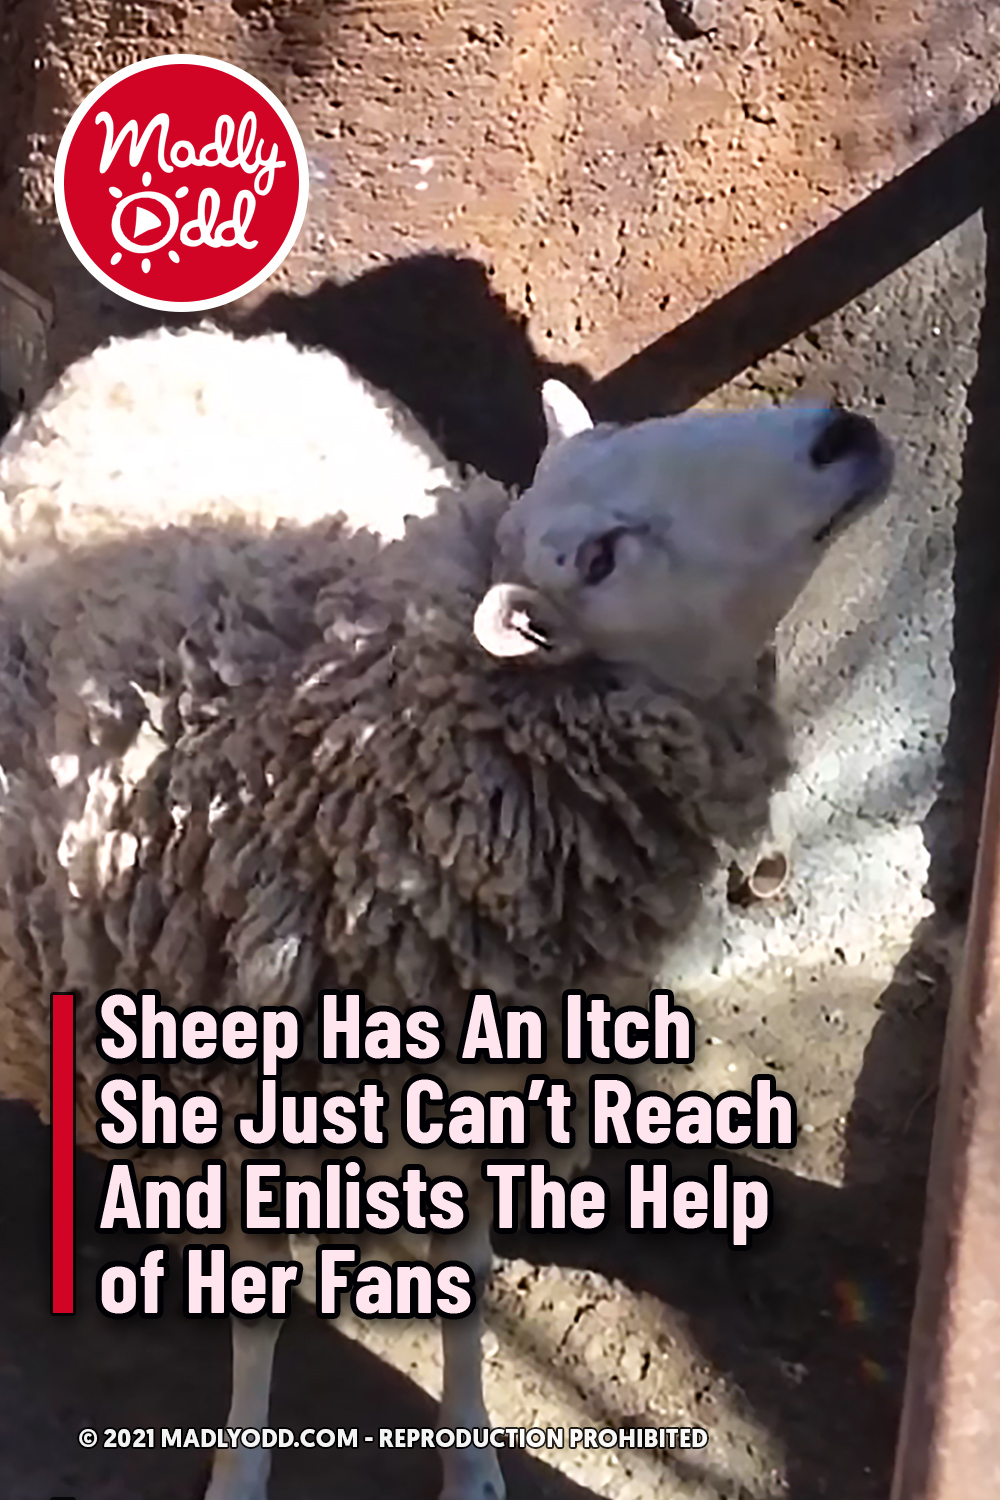 Sheep Has An Itch She Just Can’t Reach And Enlists The Help of Her Fans